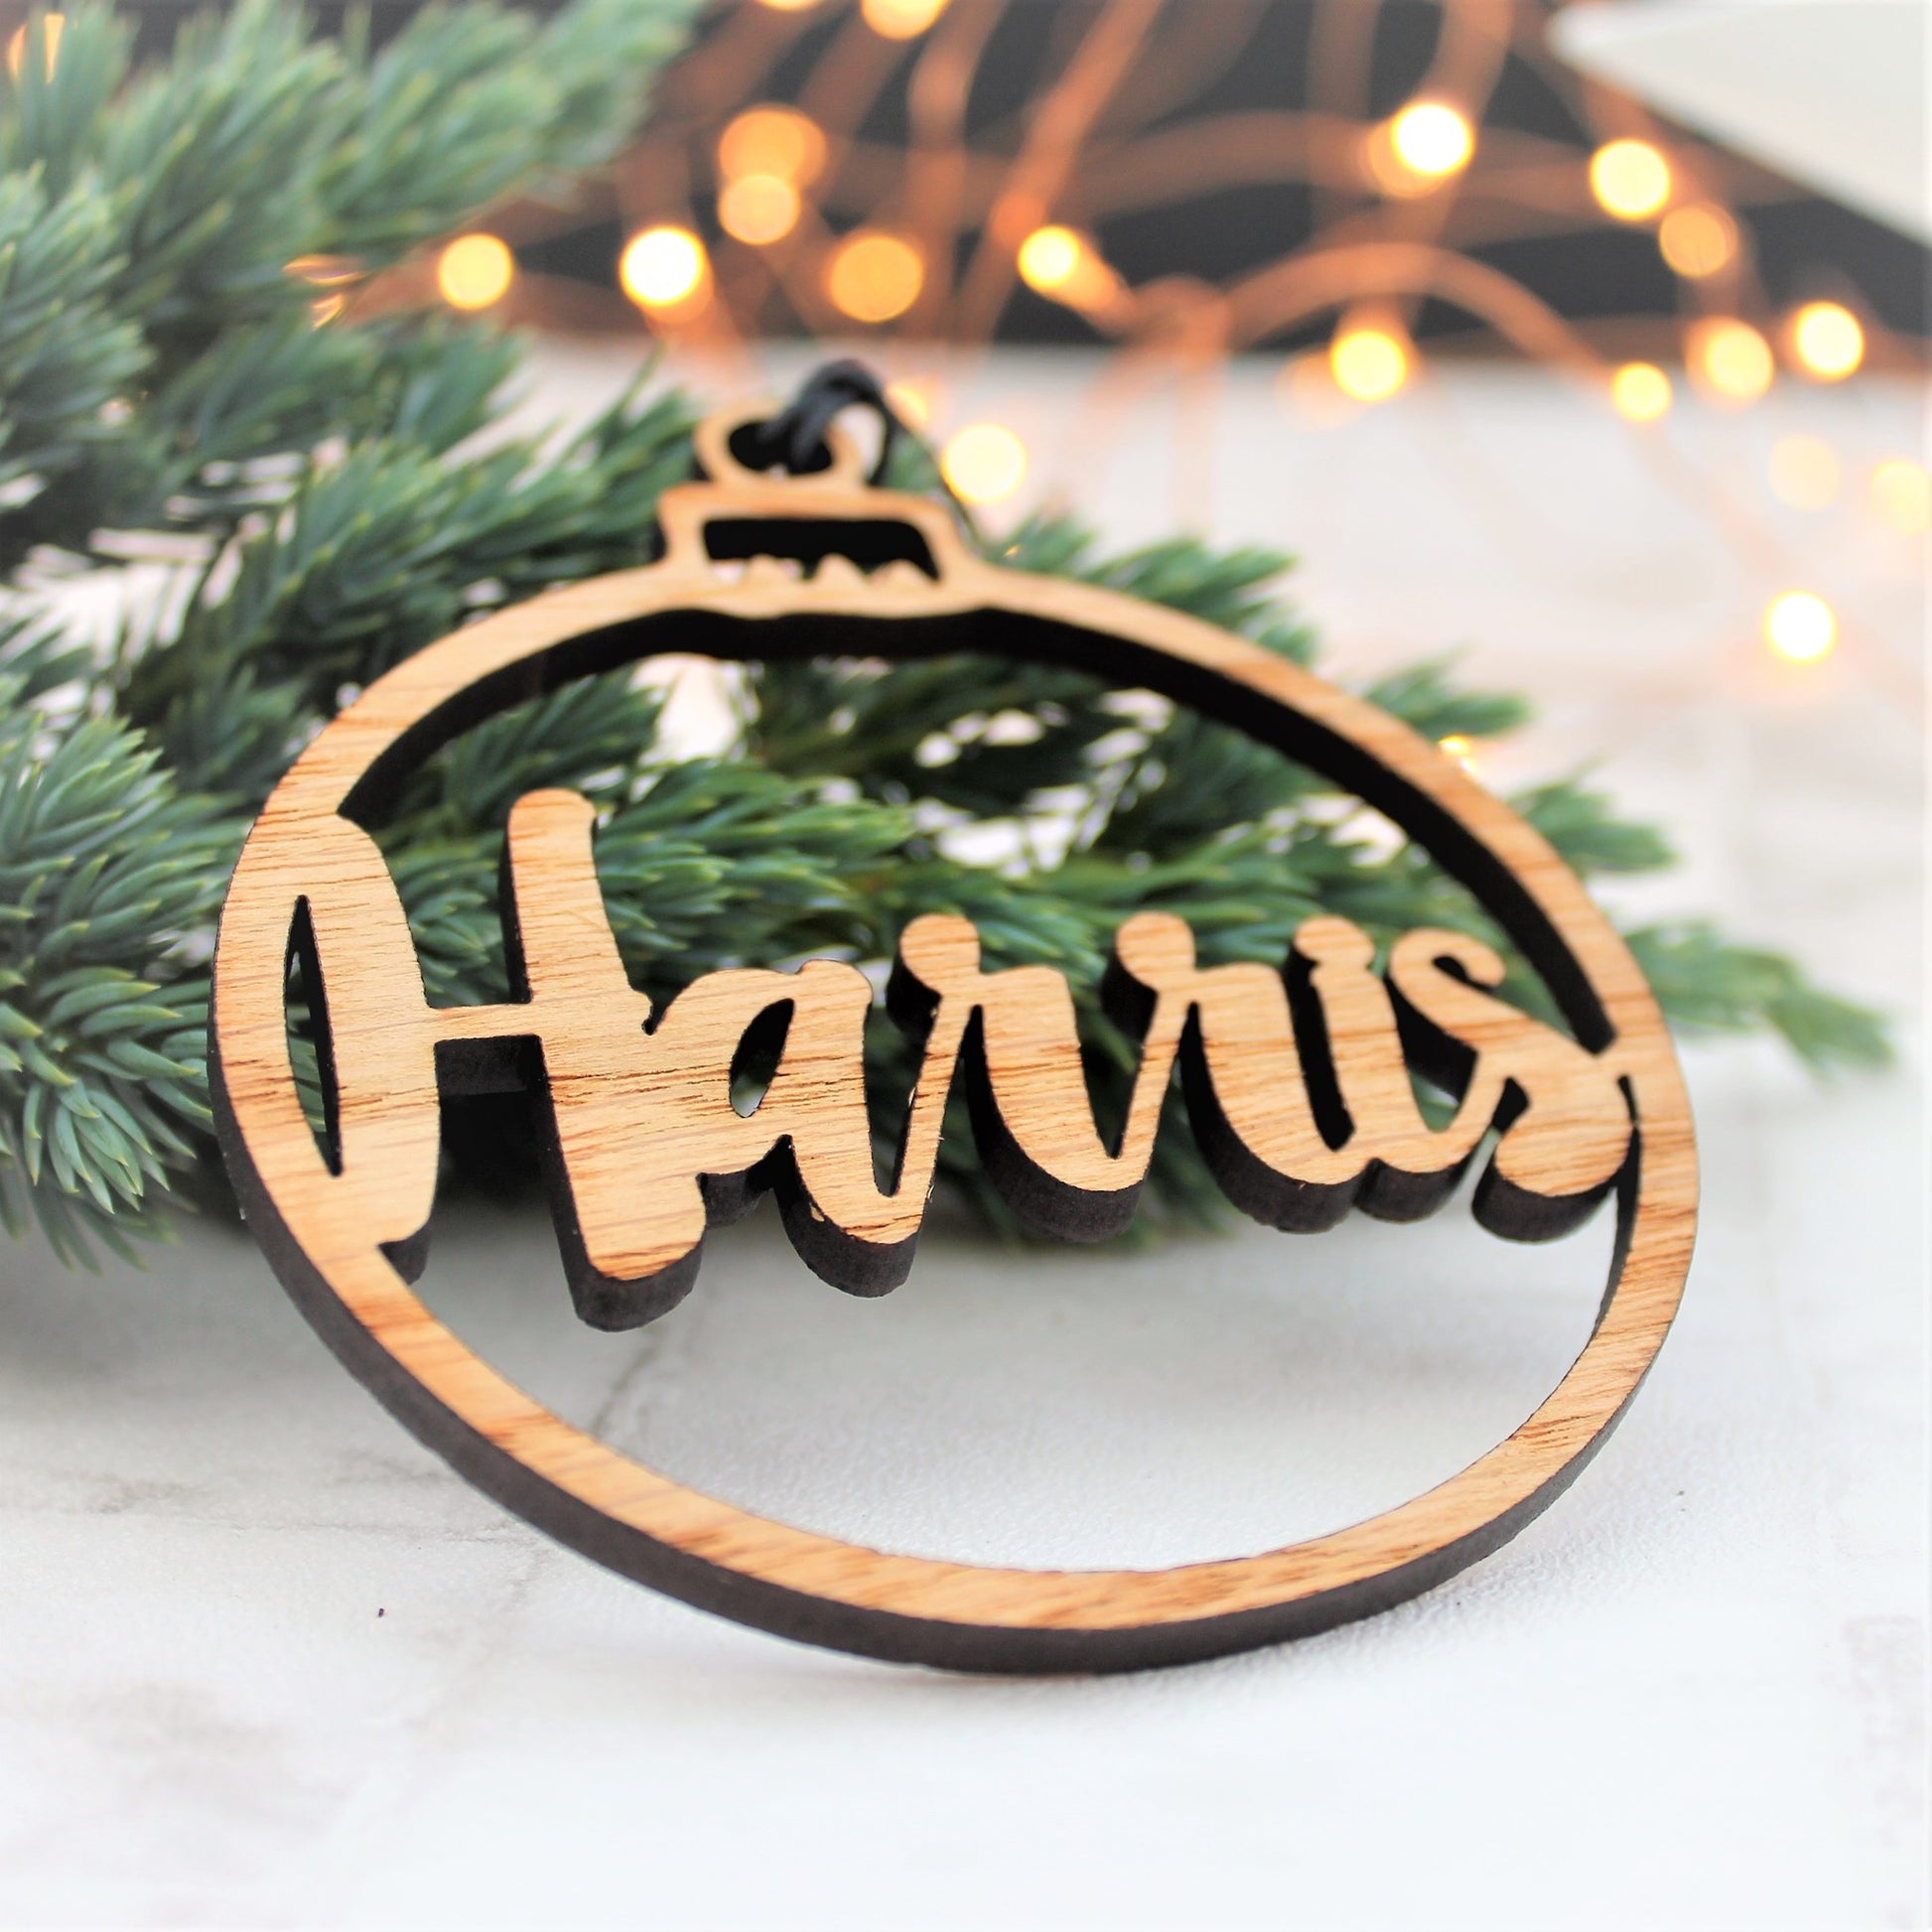 Wooden rustic personalised name bauble for christmas tree decoration 